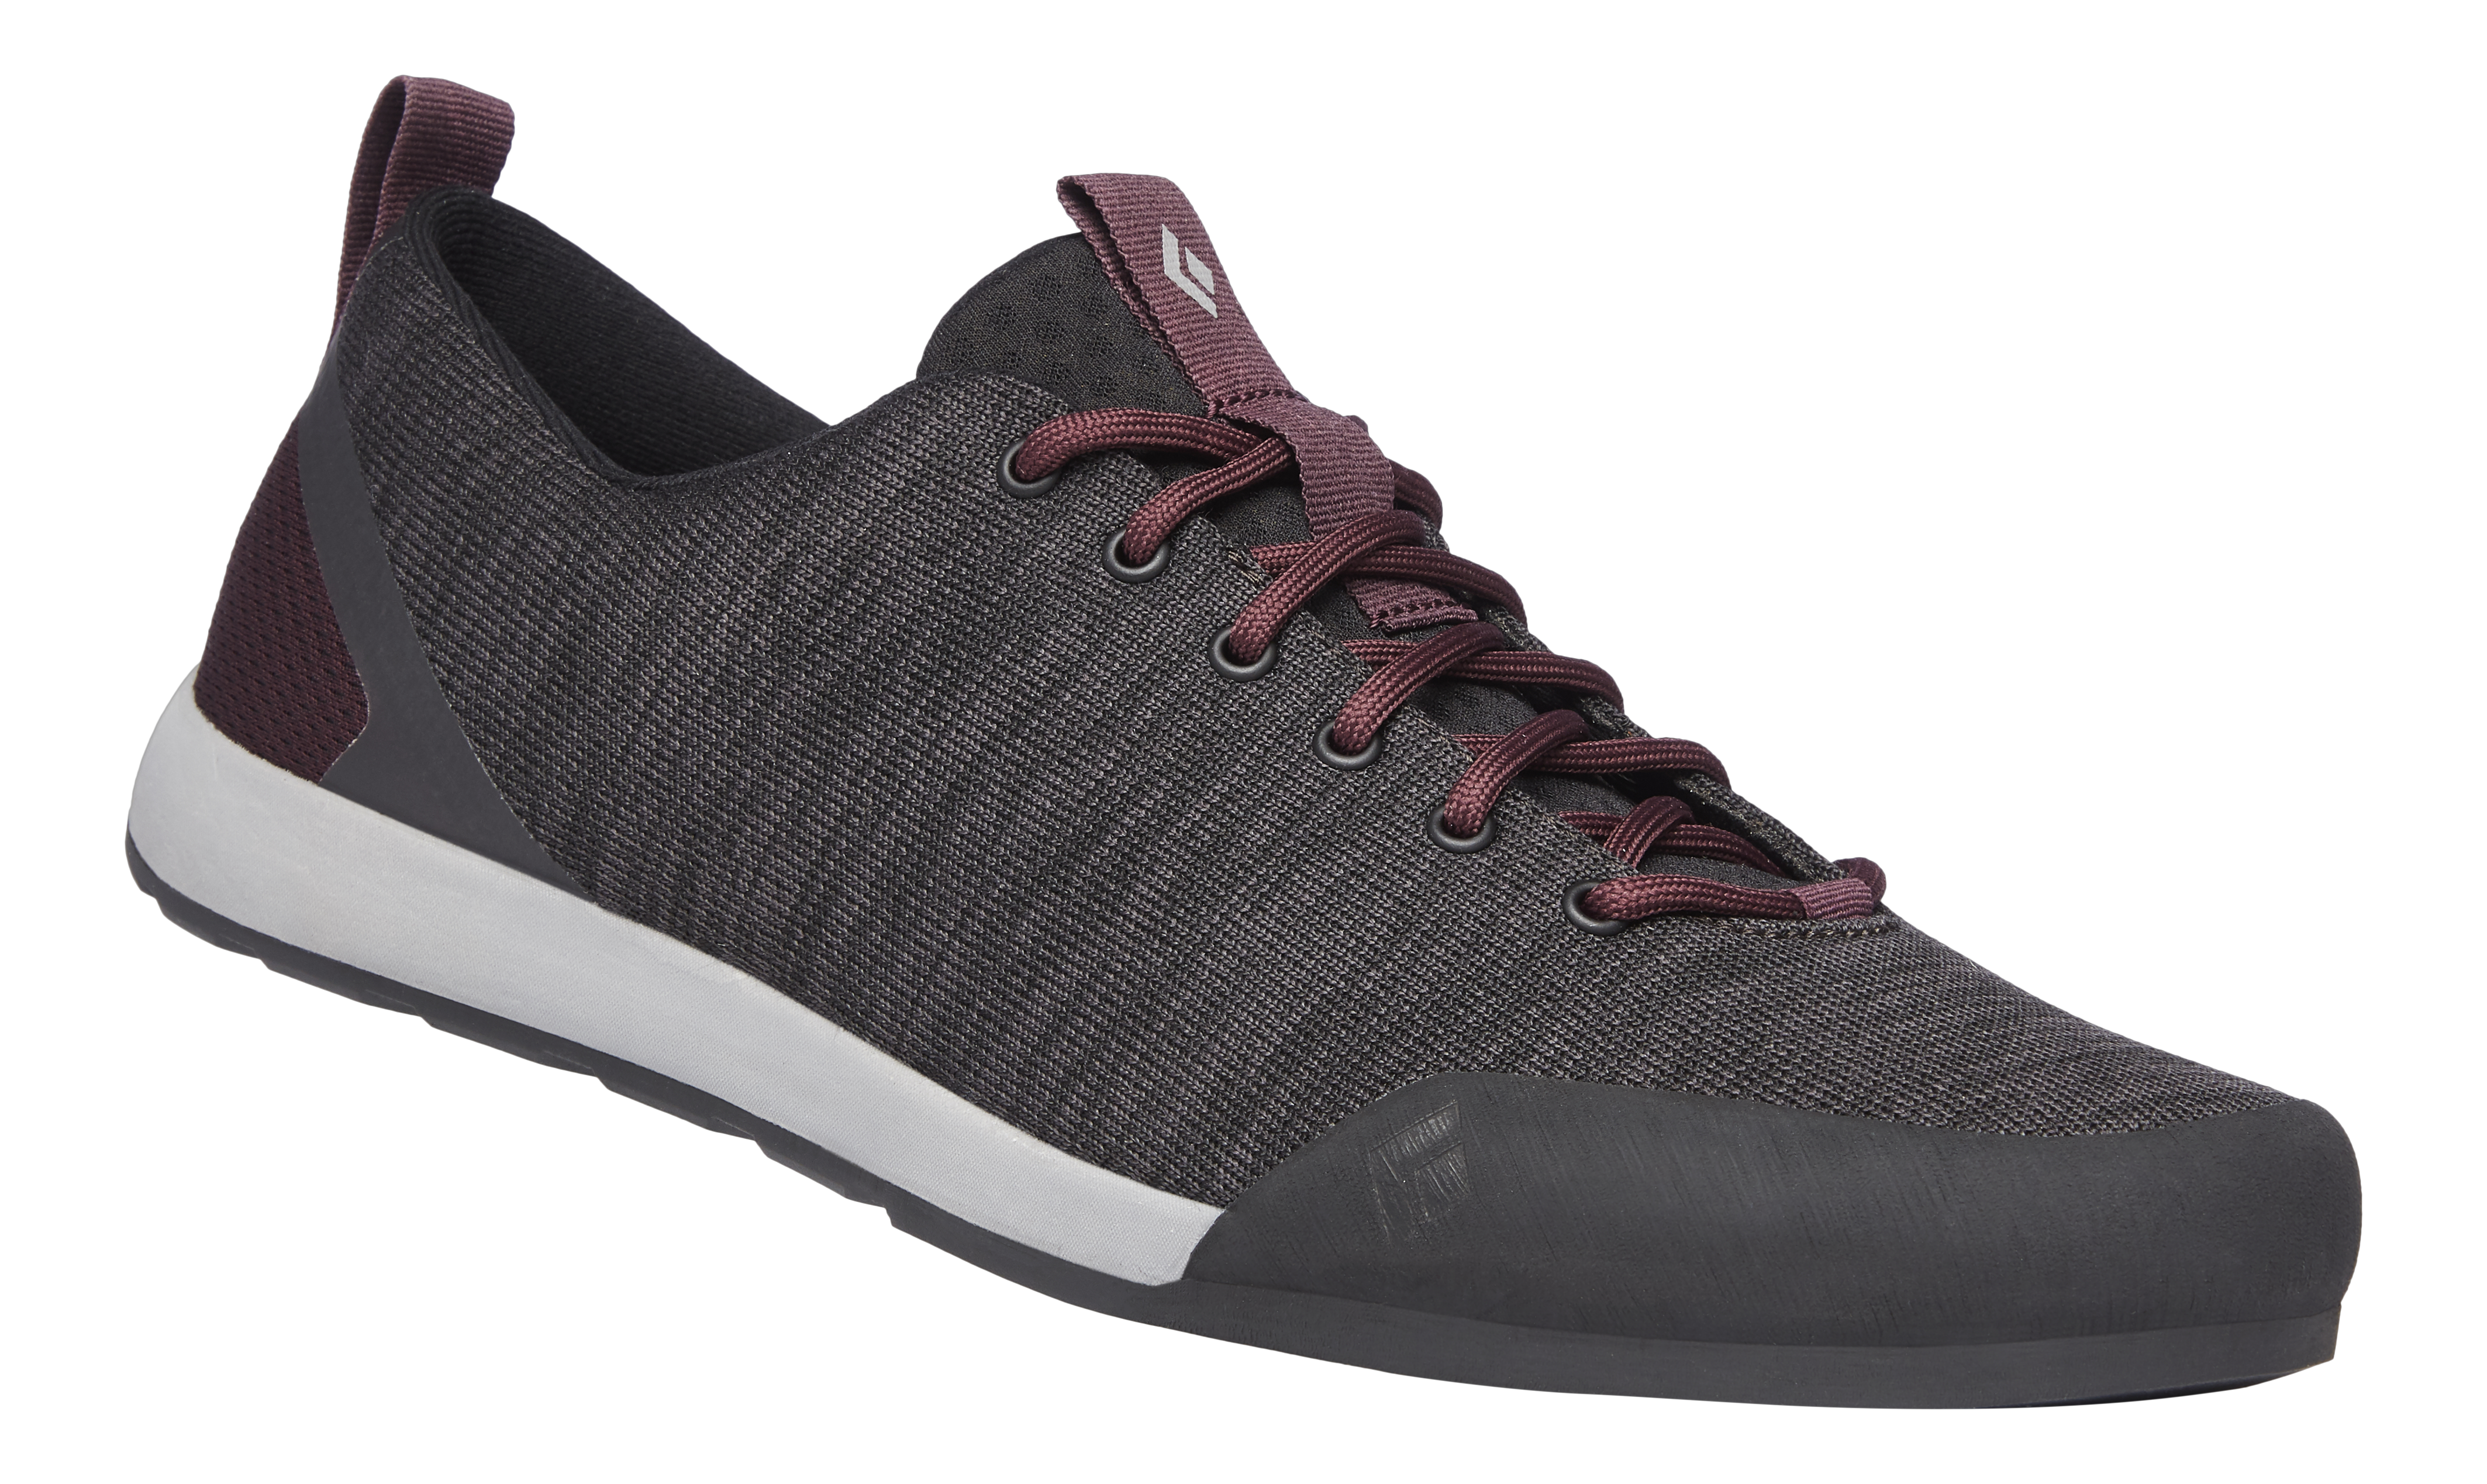 580008_9136_CIRCUITAPPROACH-WOMENS_Anthracite-Bordeaux_3qtr